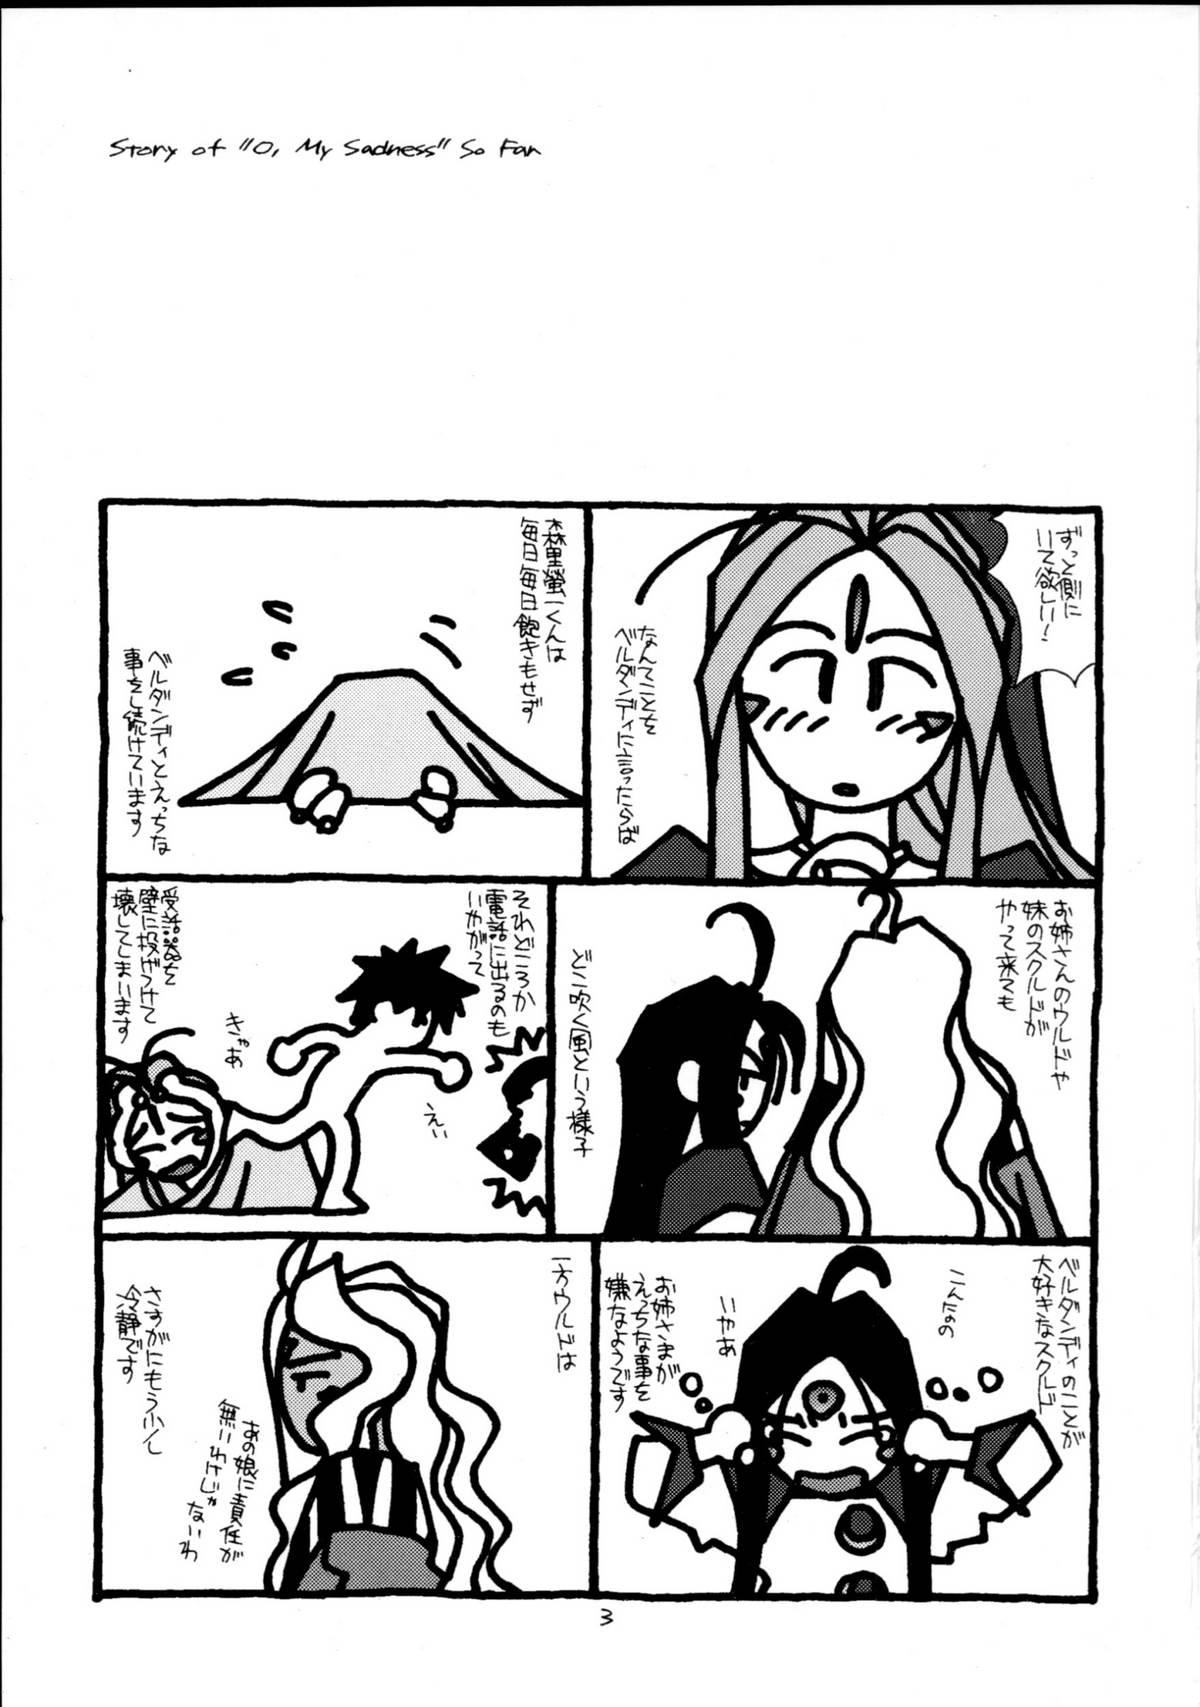 Juicy O,My Sadness Episode #2 - Ah my goddess Unshaved - Page 2